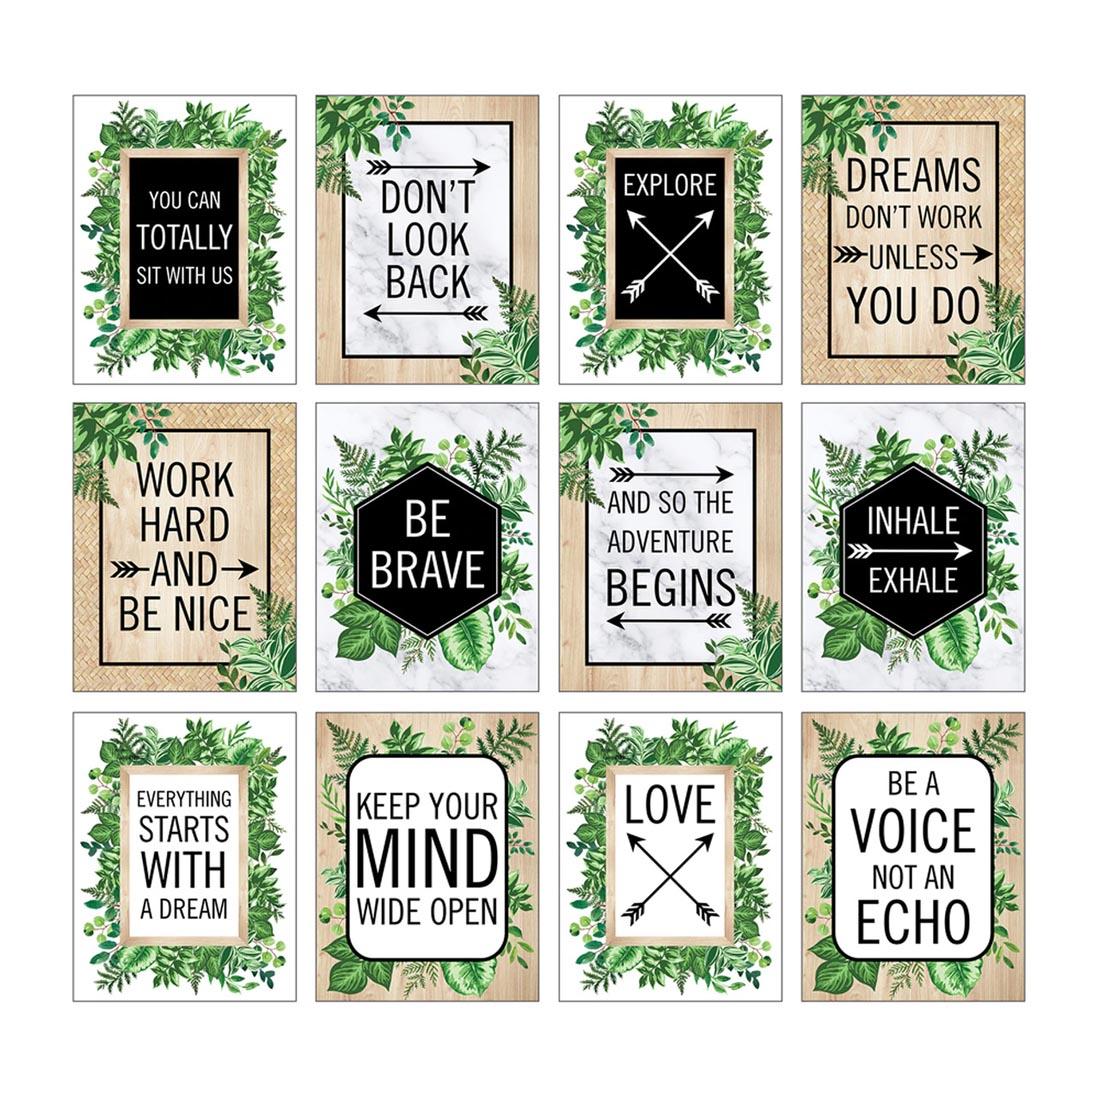 Mini Posters Set with sayings like You Can Totally Sit With Us, Don't Look Back, Explore and Dreams Don't Work Unless You Do